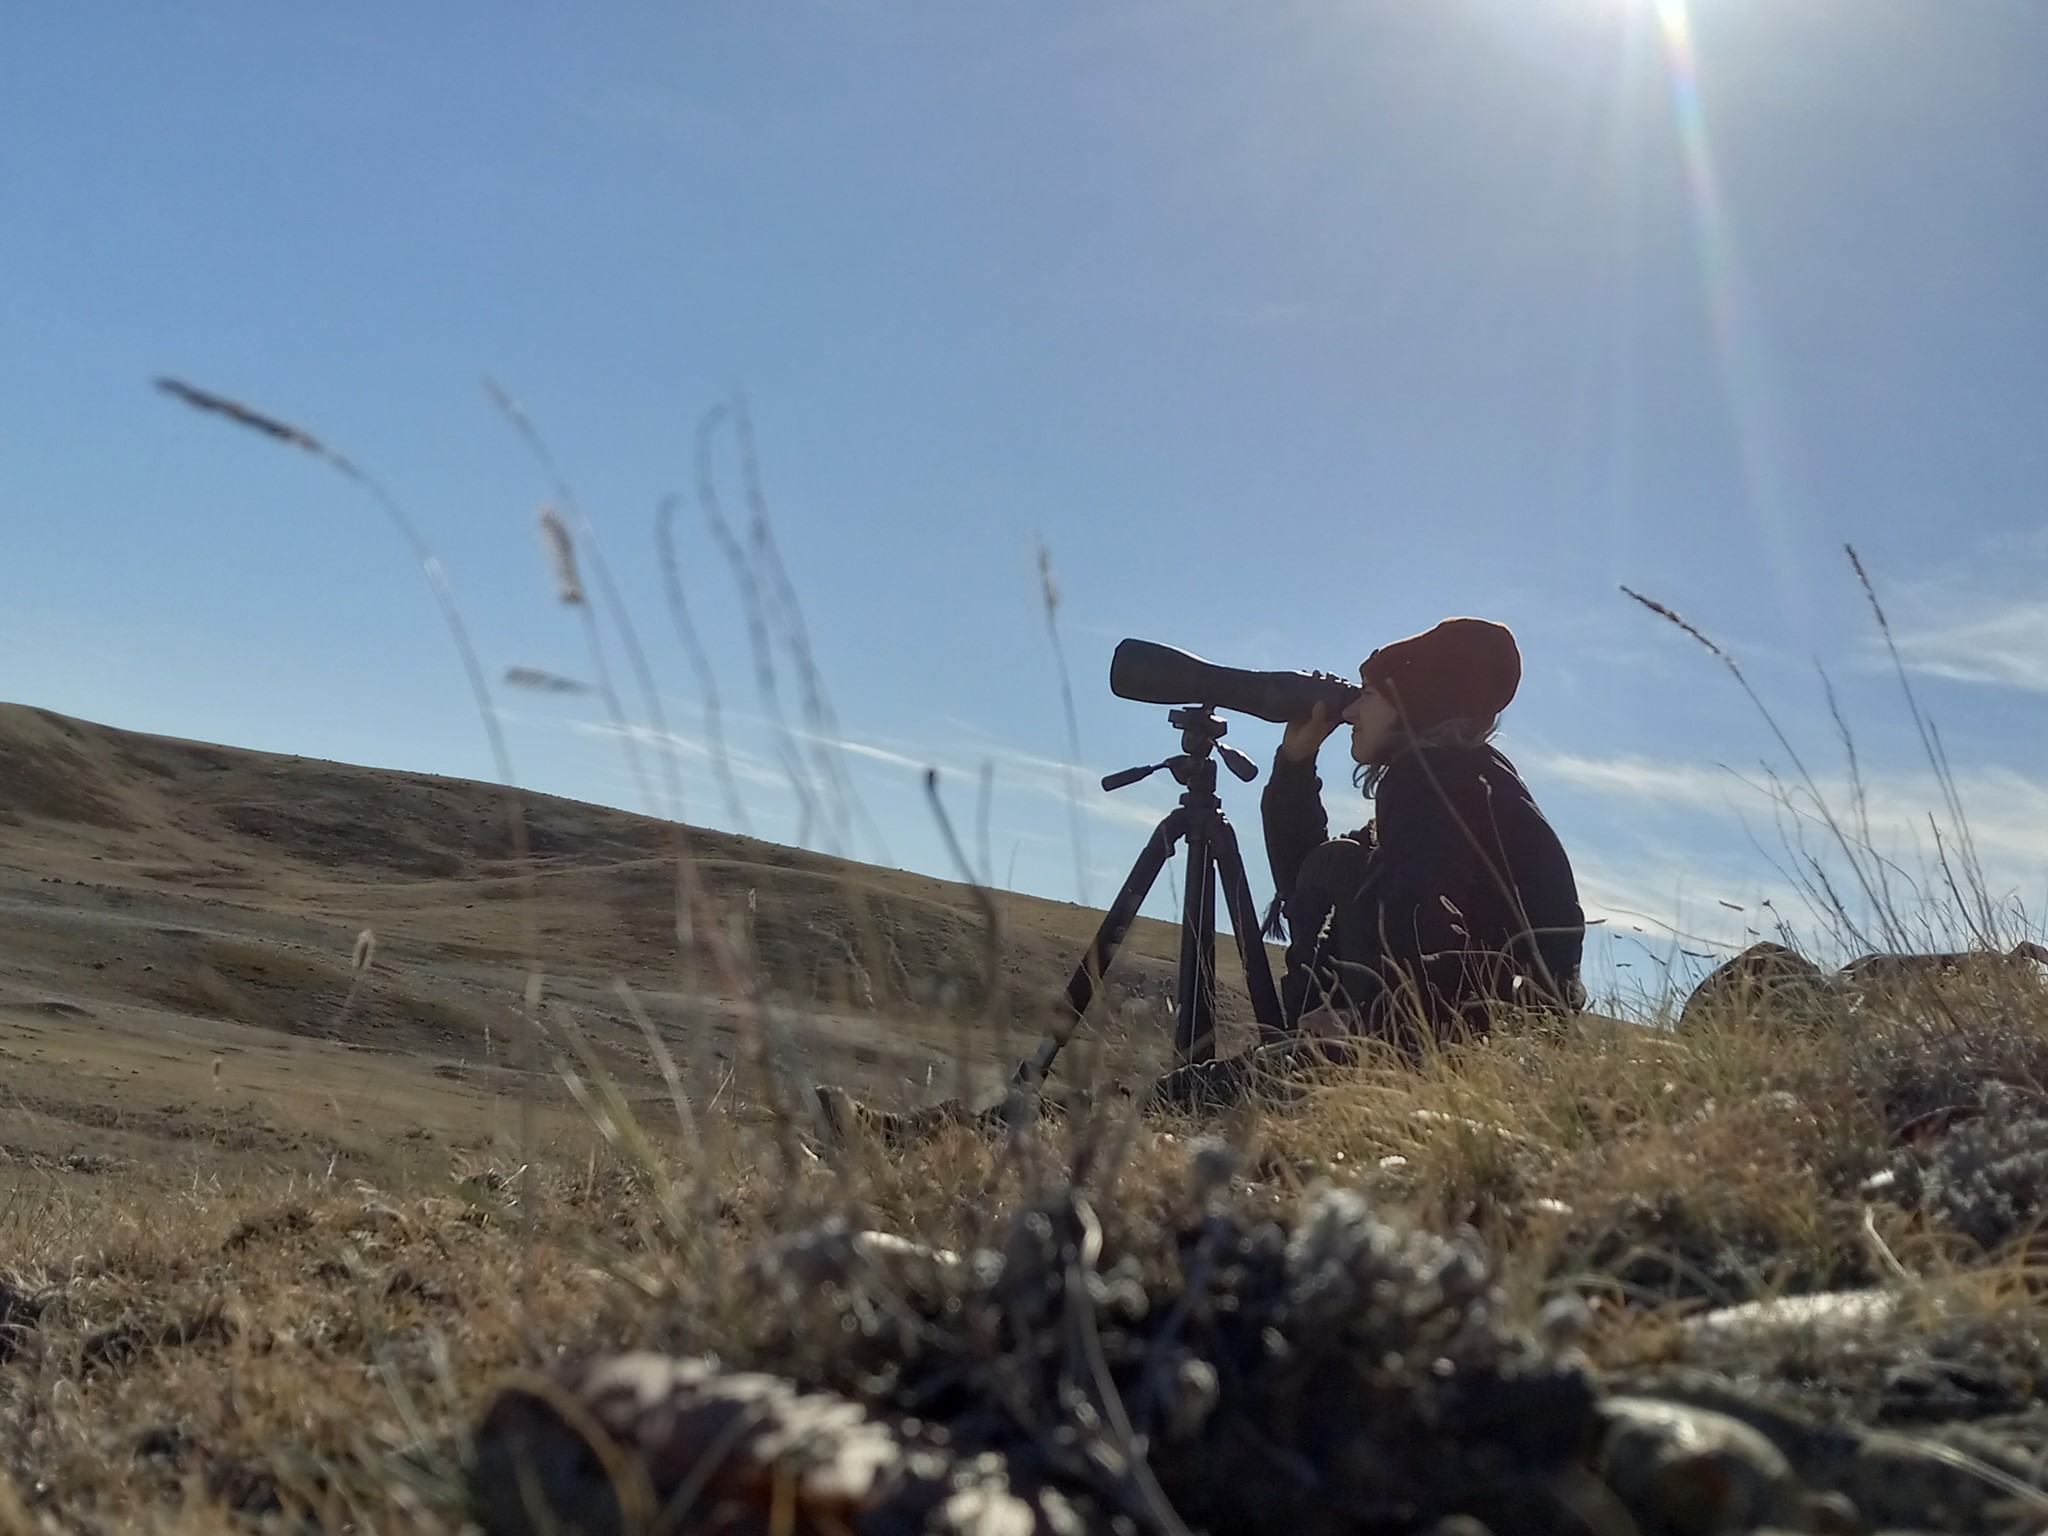 A side-profile view of MSc student Shayla Jackson sitting in a hilly field with blue skies. Shayla is peering through a thick black telescope. One leg is extended and she is wearing a red toque.